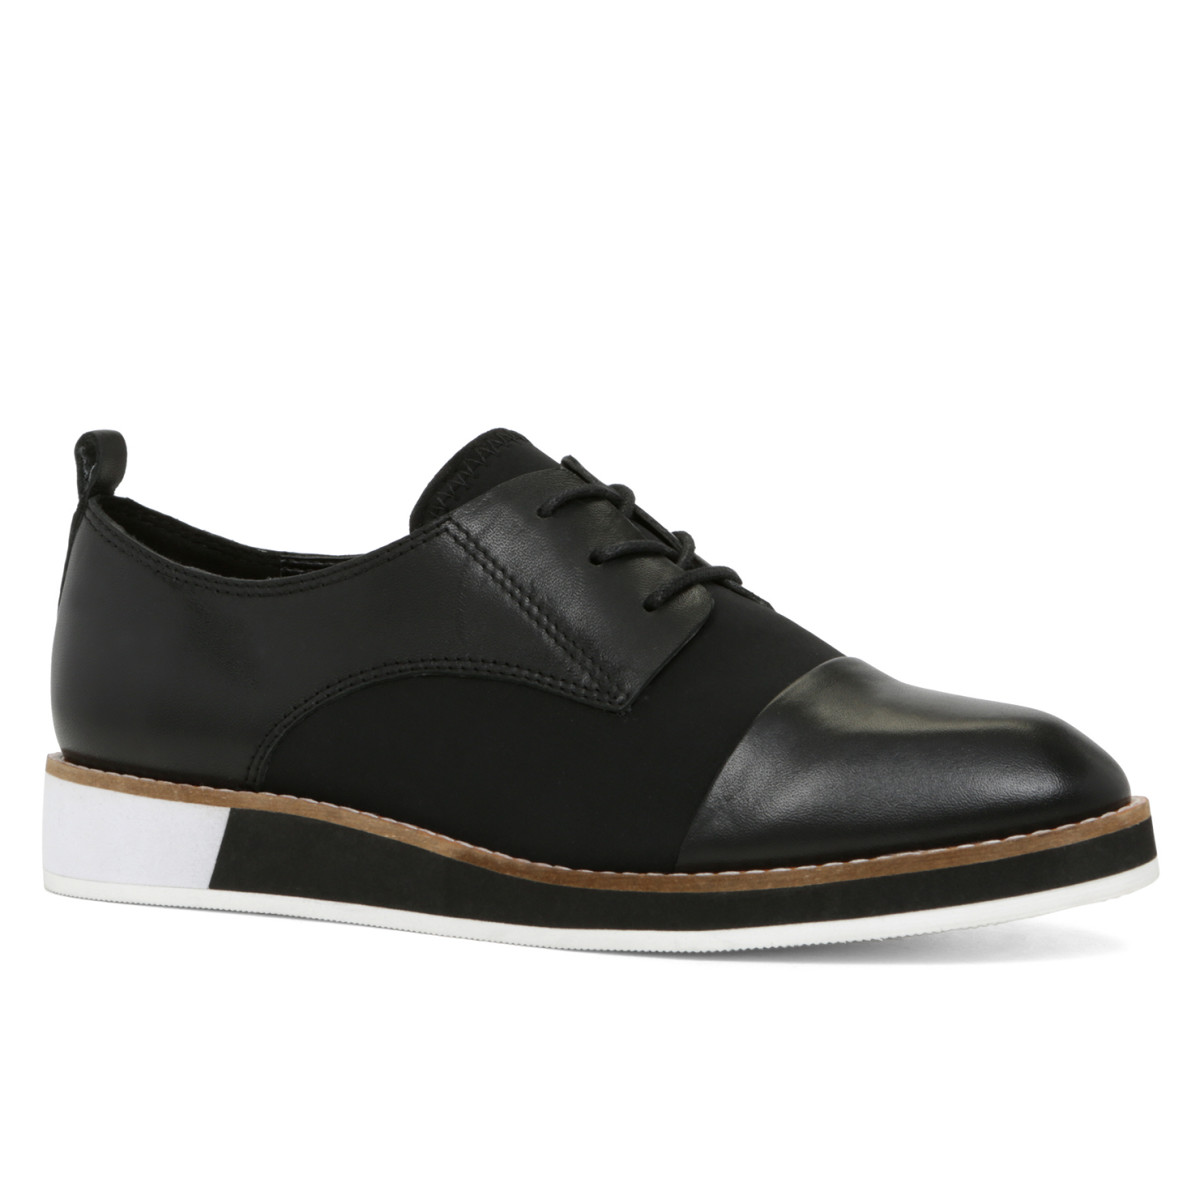 Aldo KERROBERT Oxford leather flatform with rubber sole ($85 at aldo.com) -- also in grey with an acid-yellow and white sole.